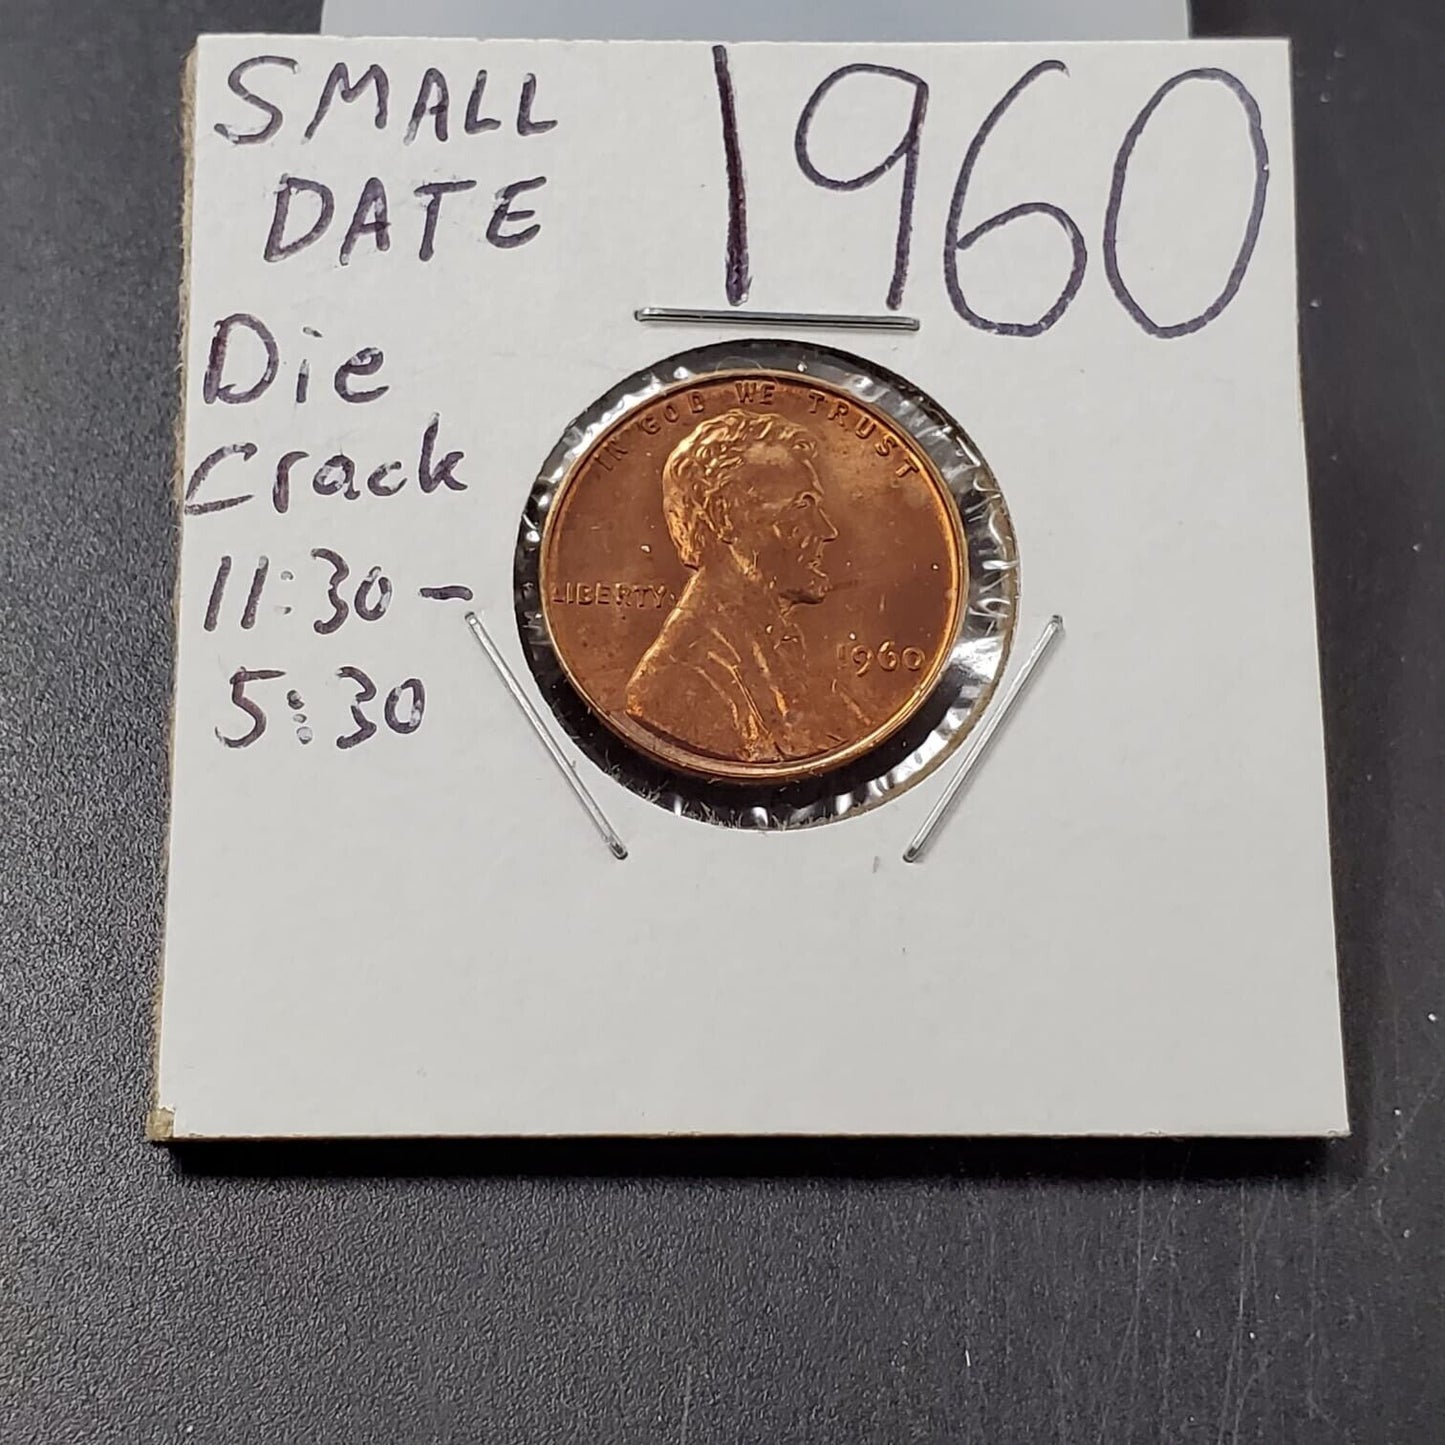 1960 P Lincoln Memorial Cent Penny Coin Small Date Variety with Die Crack CH BU